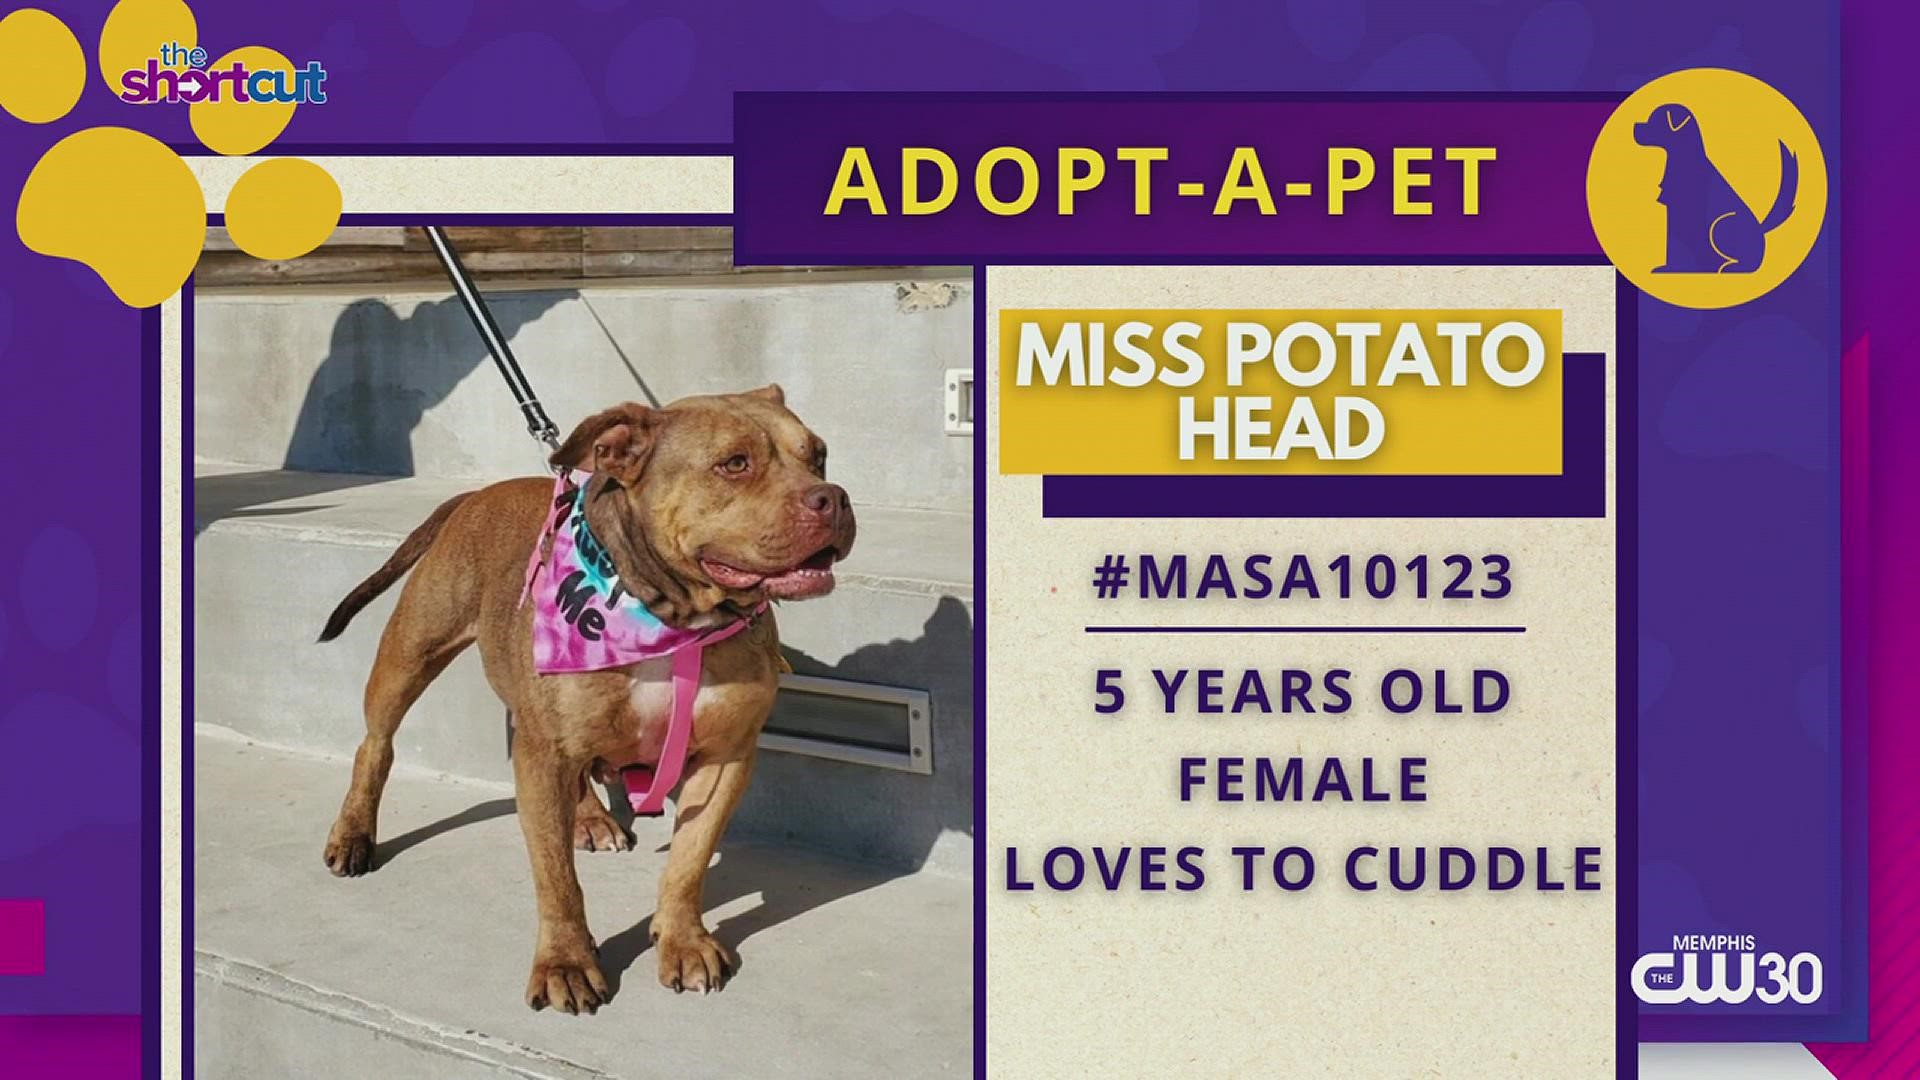 Love dogs? Join host Sydney Neely, Memphis Animal Services (MAS) director Katie Pemberton, and MAS's Miss Potato Head in honor of "Adopt-a-Pet Thursday!"